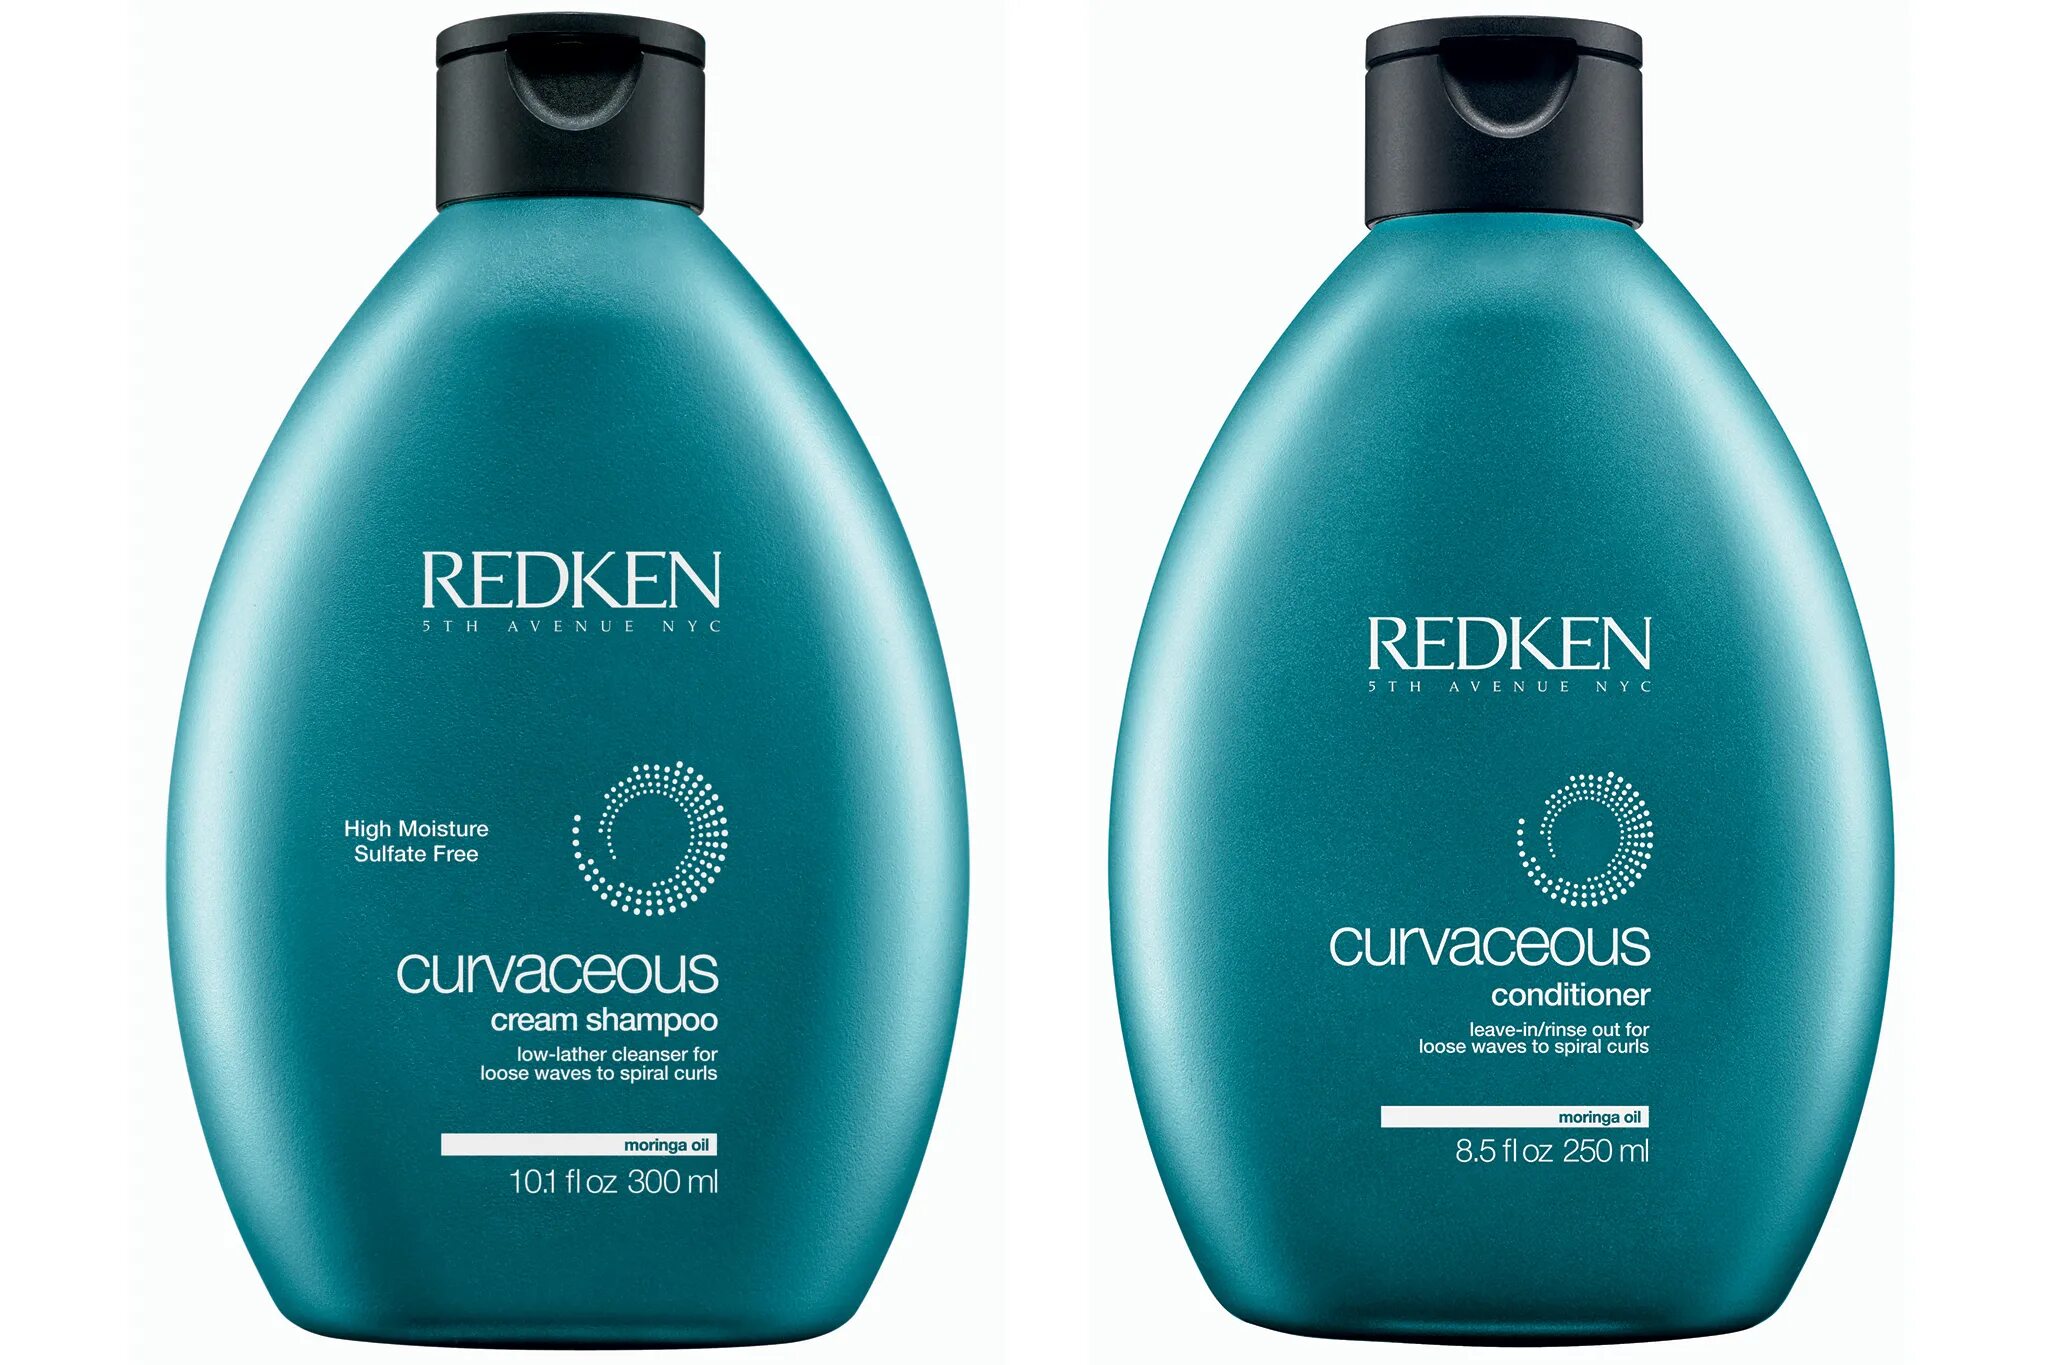 Hair products. Curvaceous шампунь. Redken. Shampoo for curly hair.